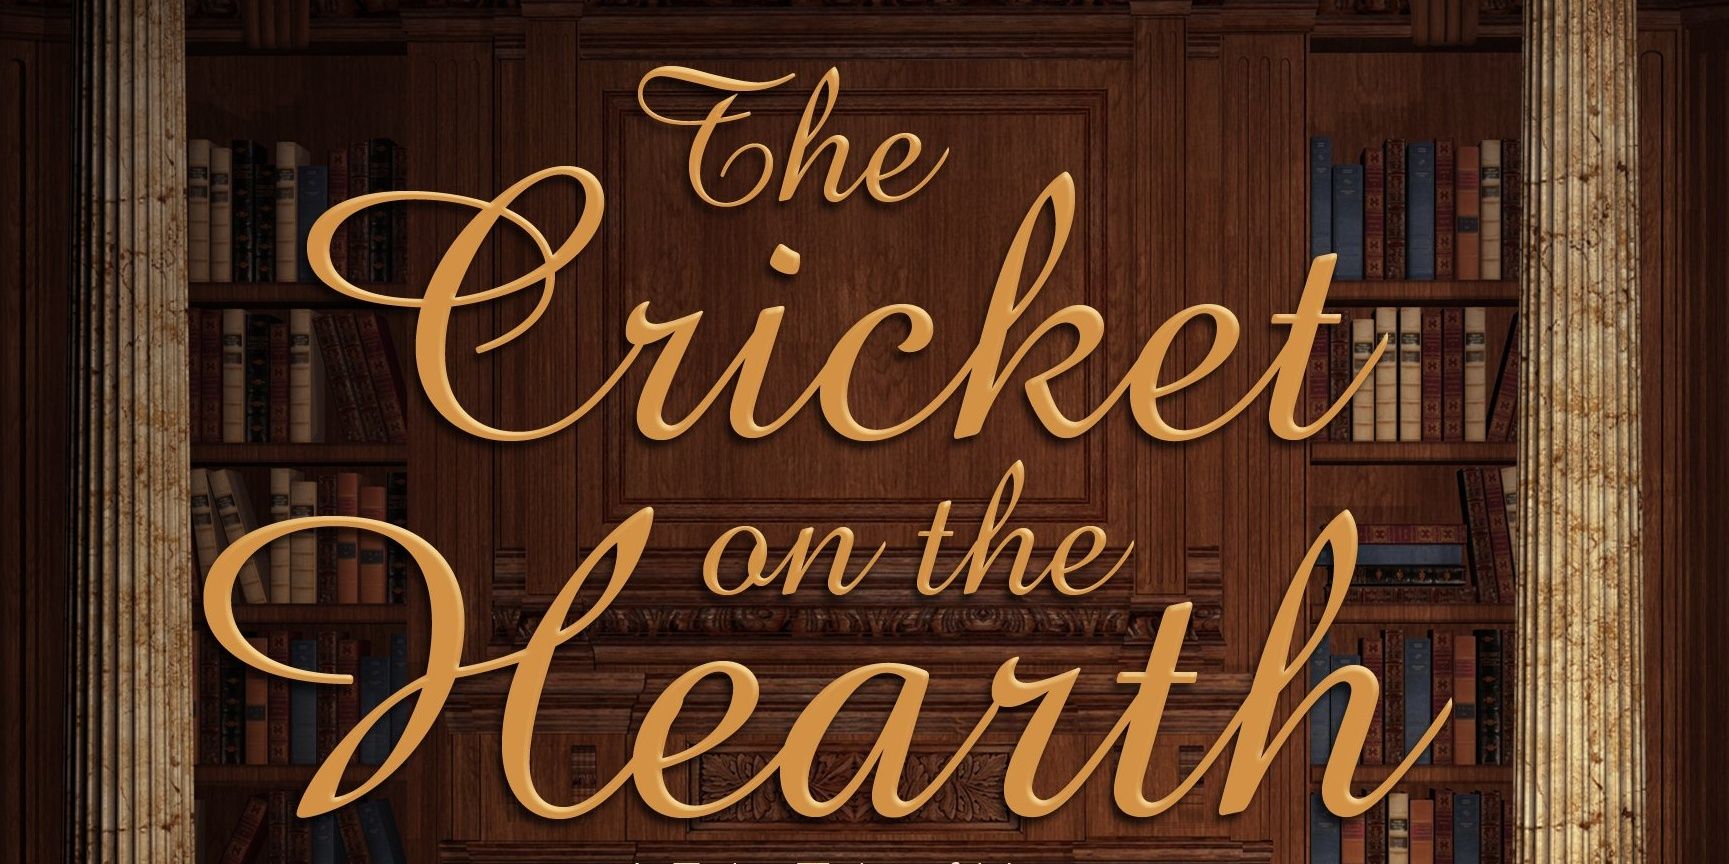 Cover of The Cricket on the Heath by Dickens.